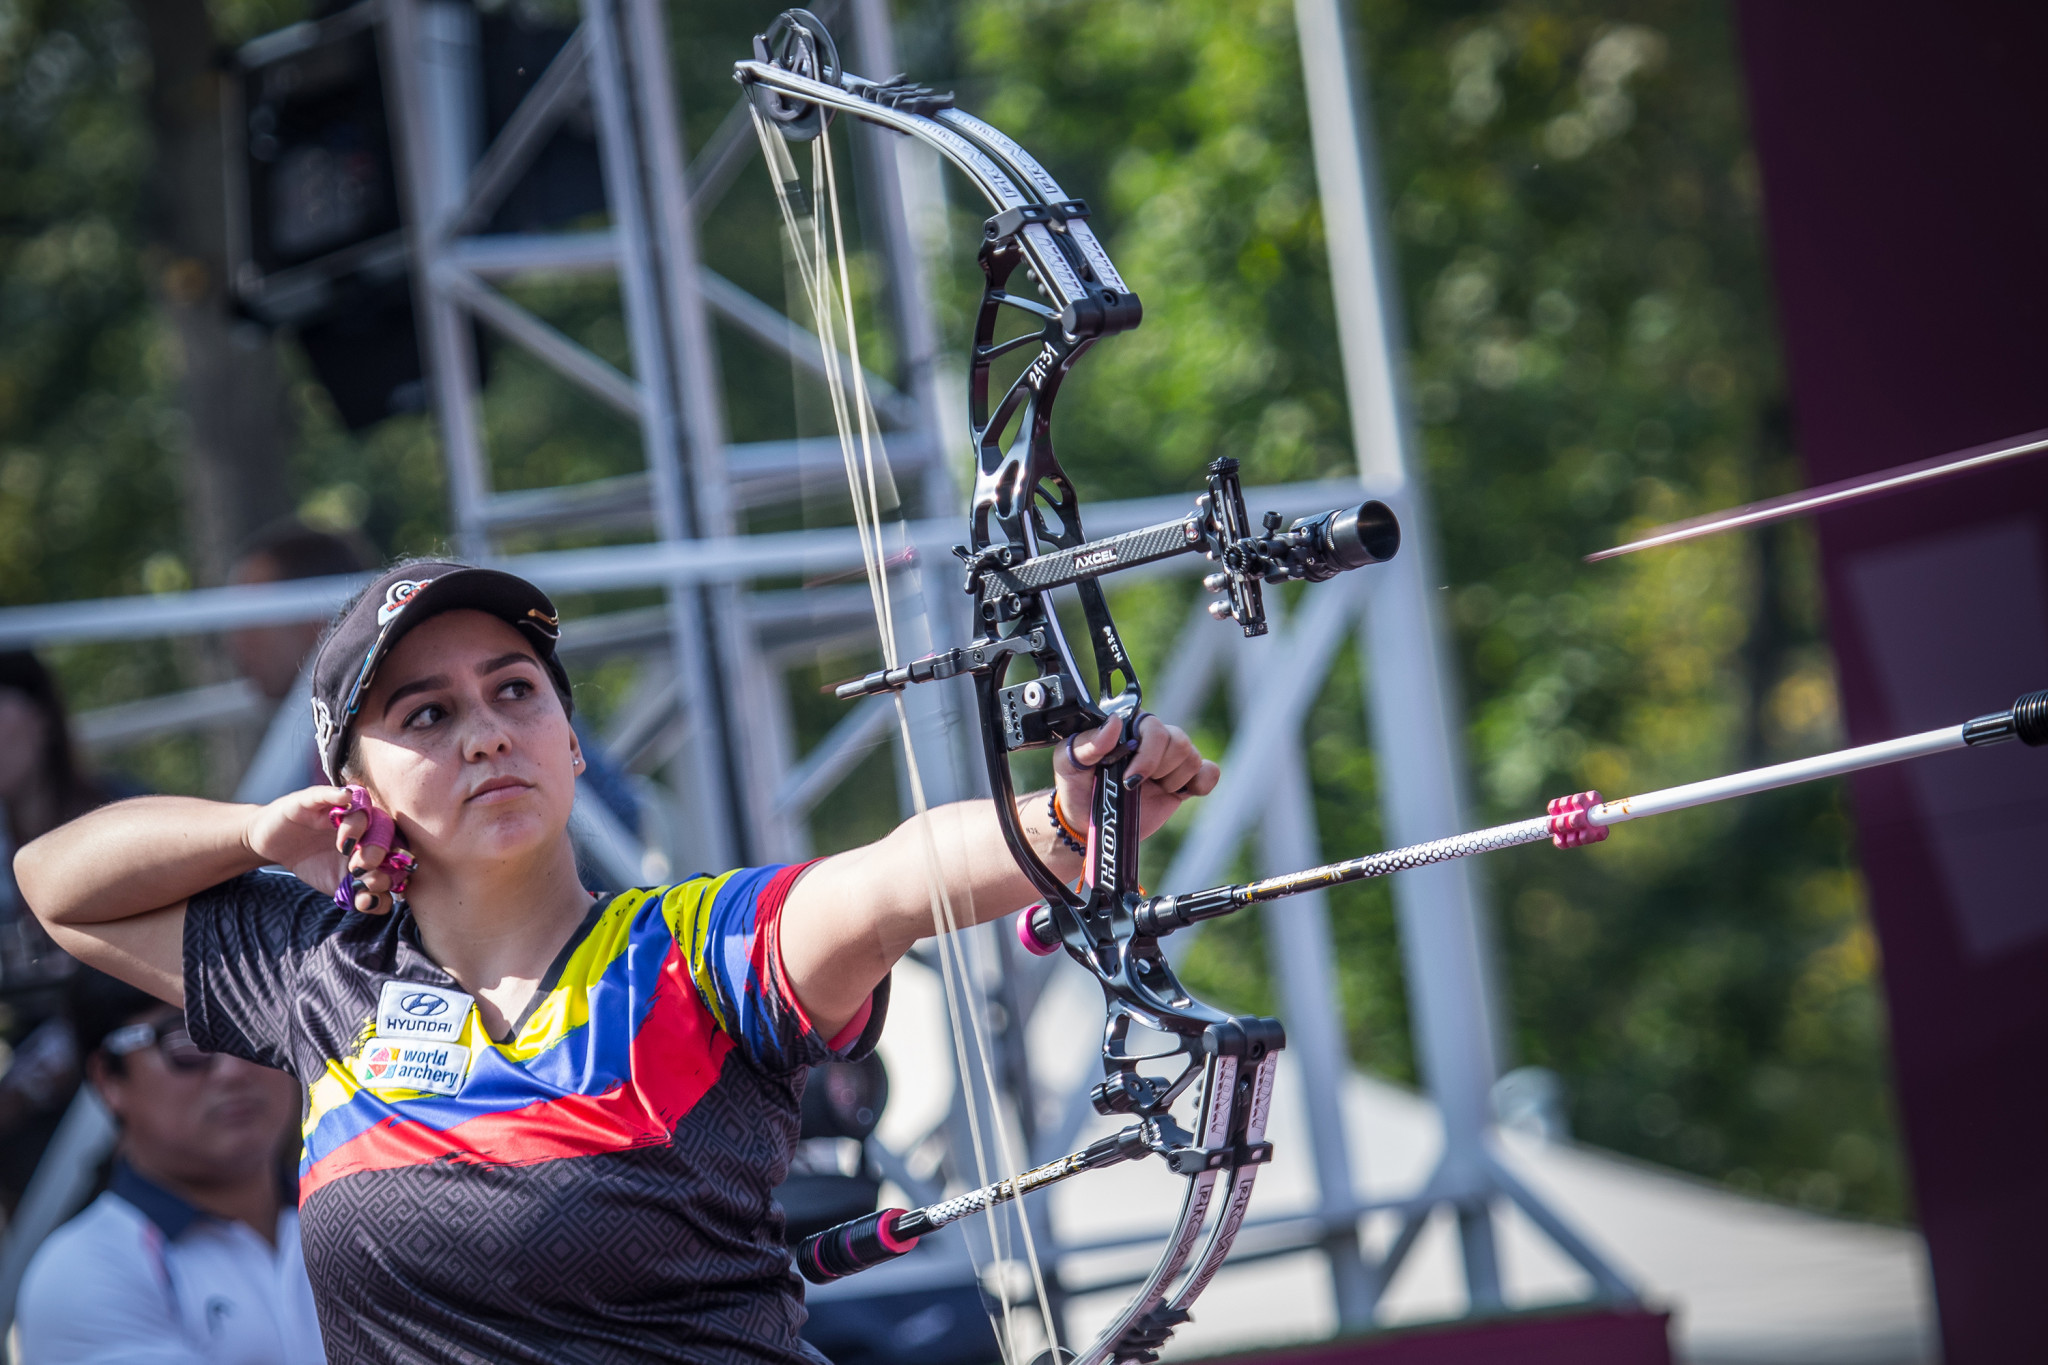 Sara López was the winner of World Archery's first remote knockout tournament ©Getty Images